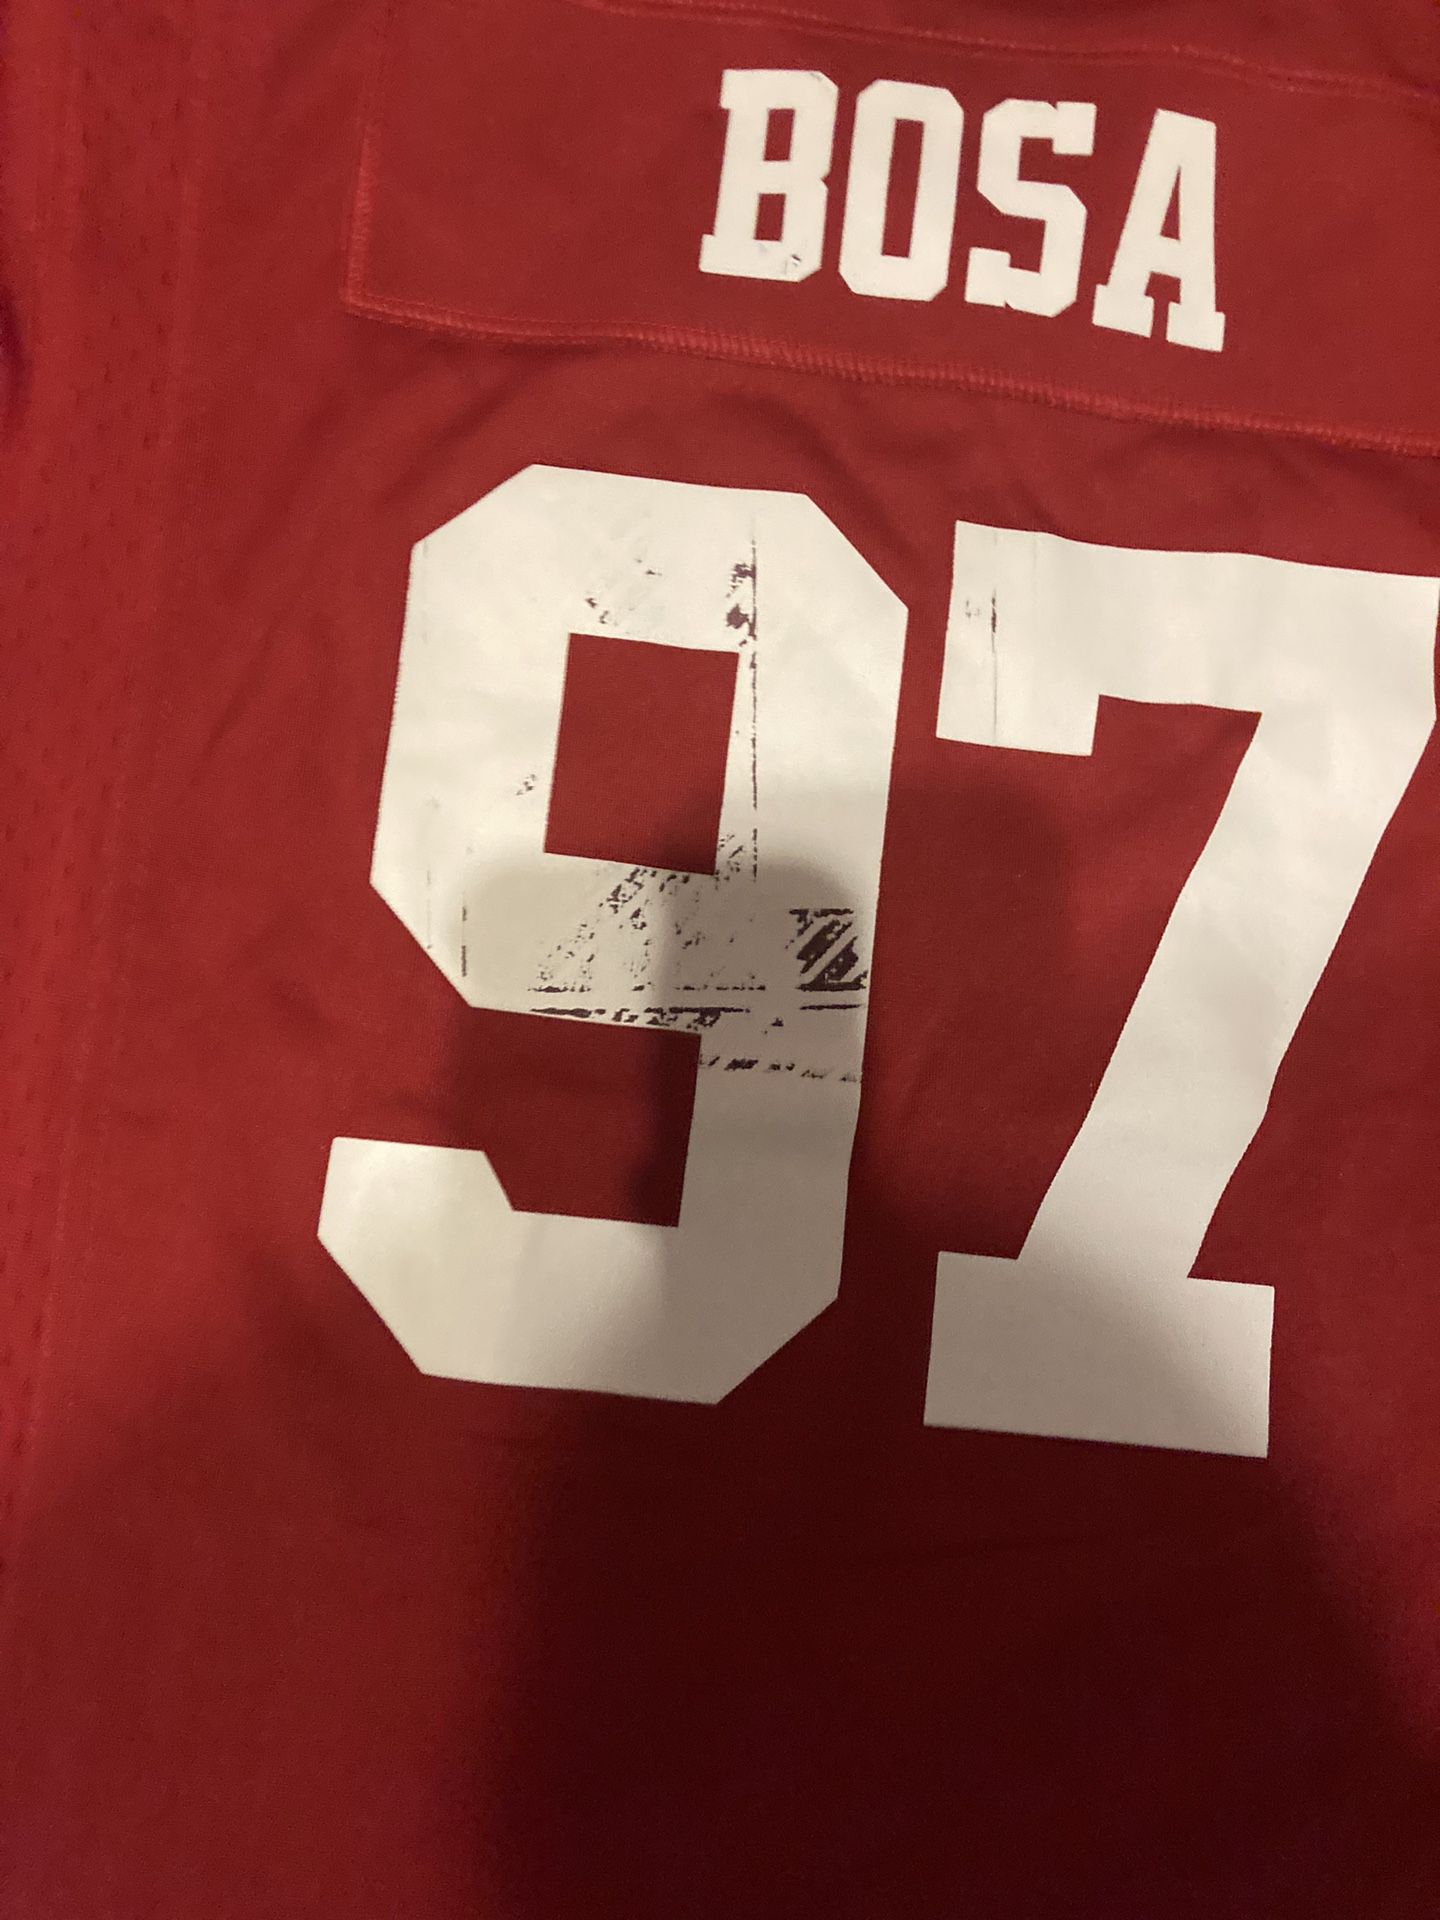 Nick Bosa Jersey for Sale in Stockton, CA - OfferUp